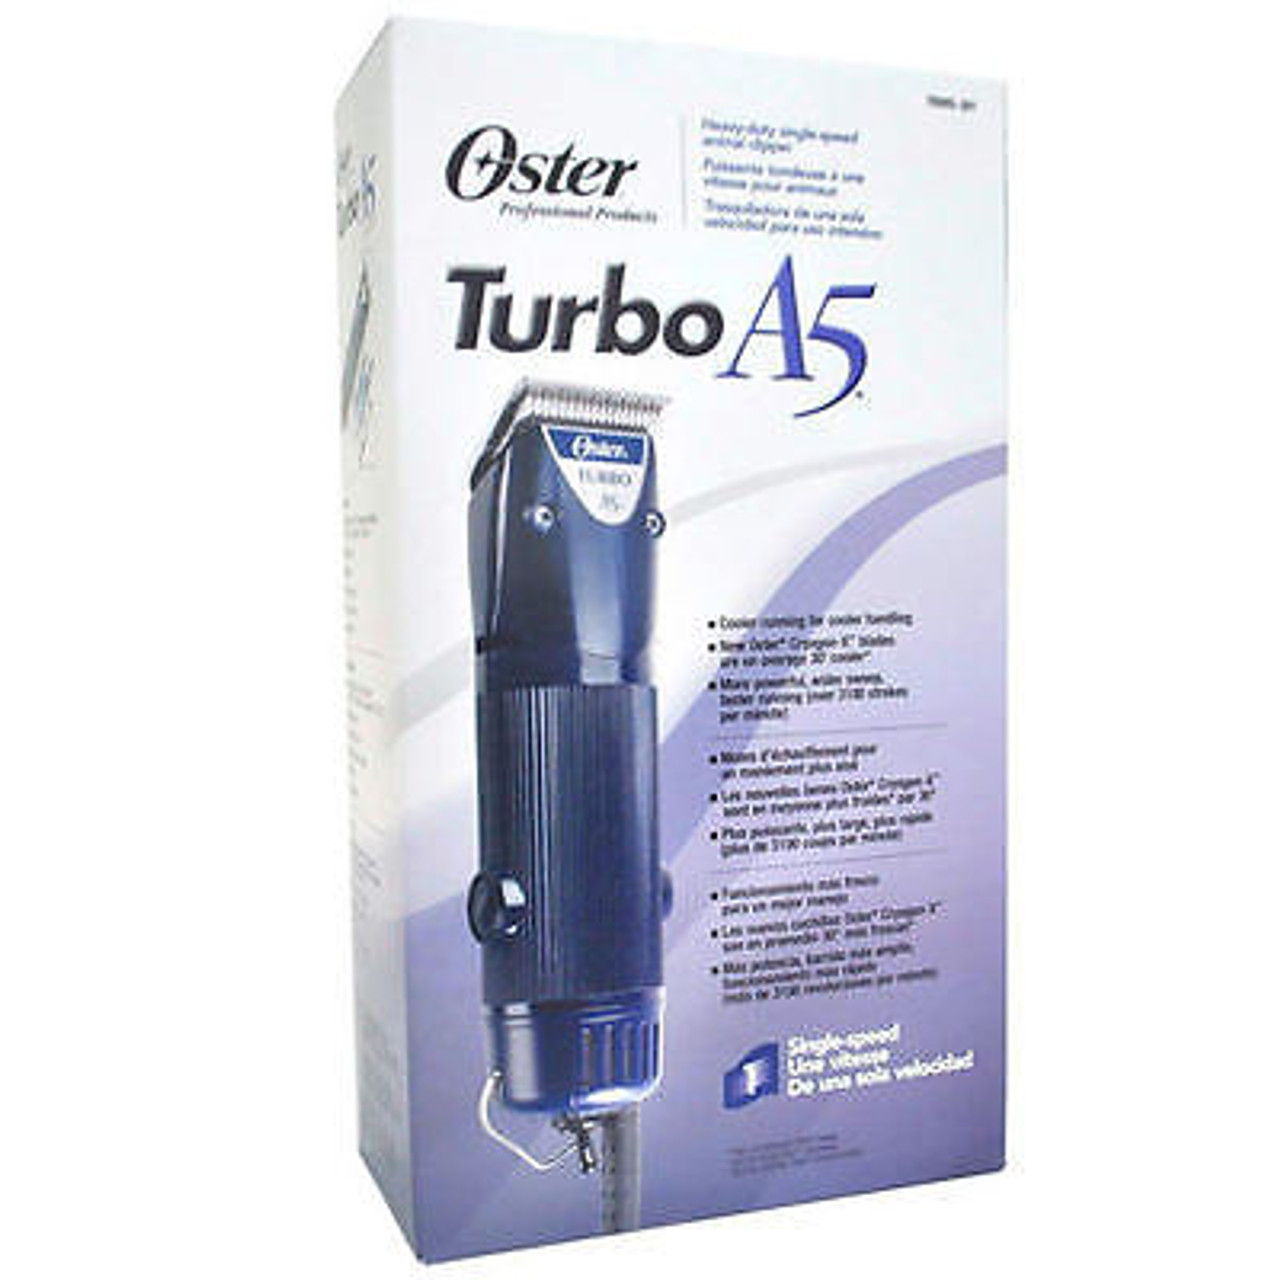 Oster Turbo A5